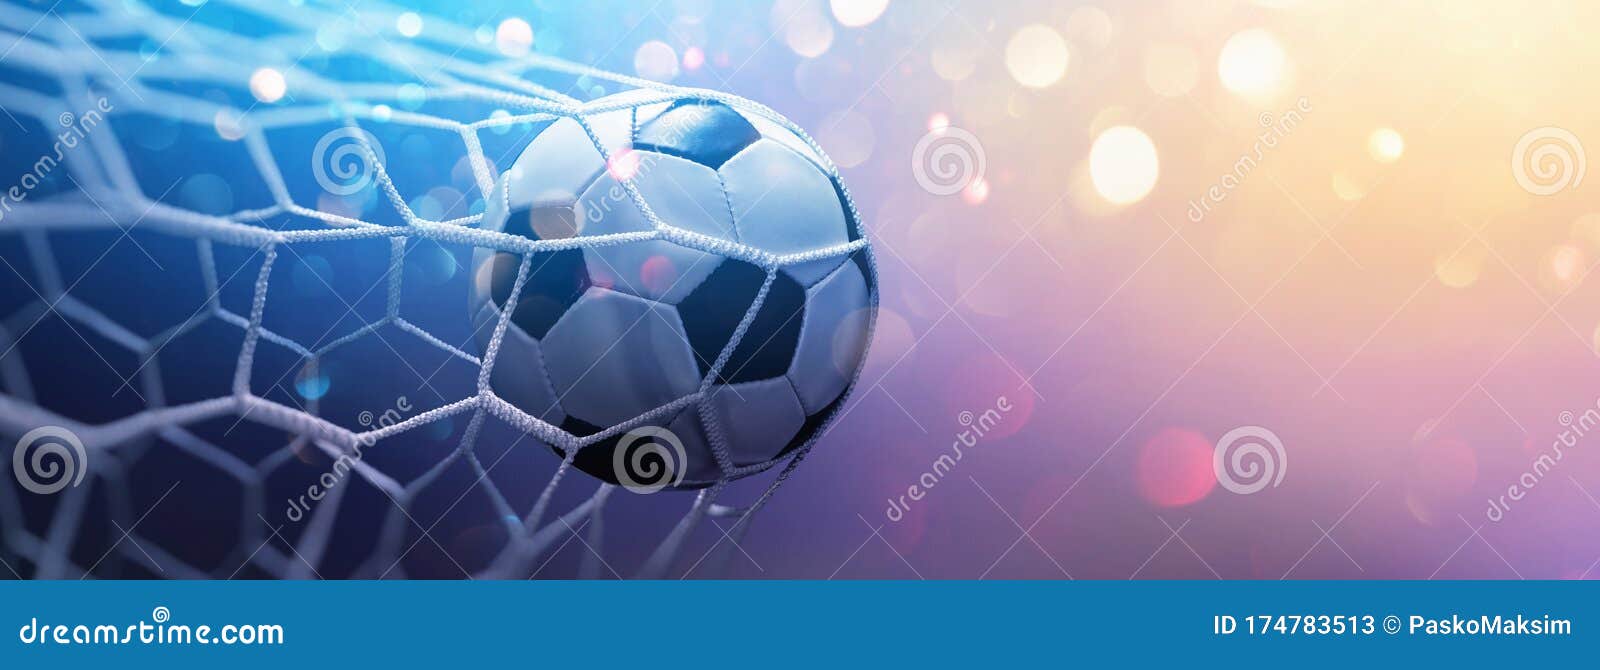 Soccer Ball In Goal Multicolor Background Stock Image Image Of Game World